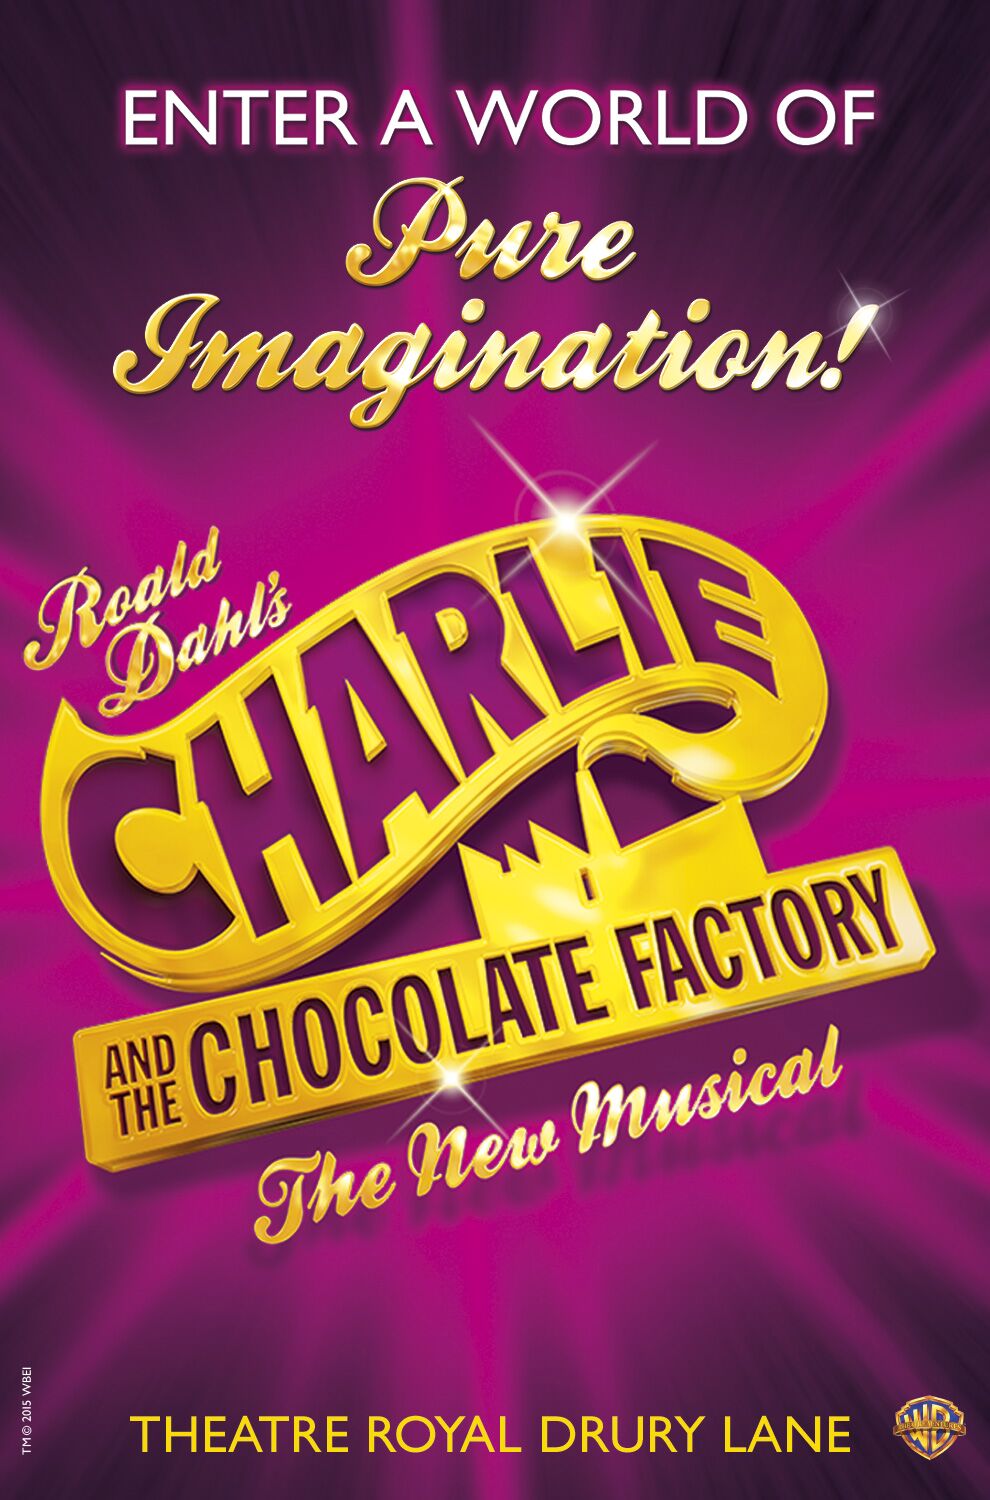 Charlie-and-the-Chocolate-Factory_London